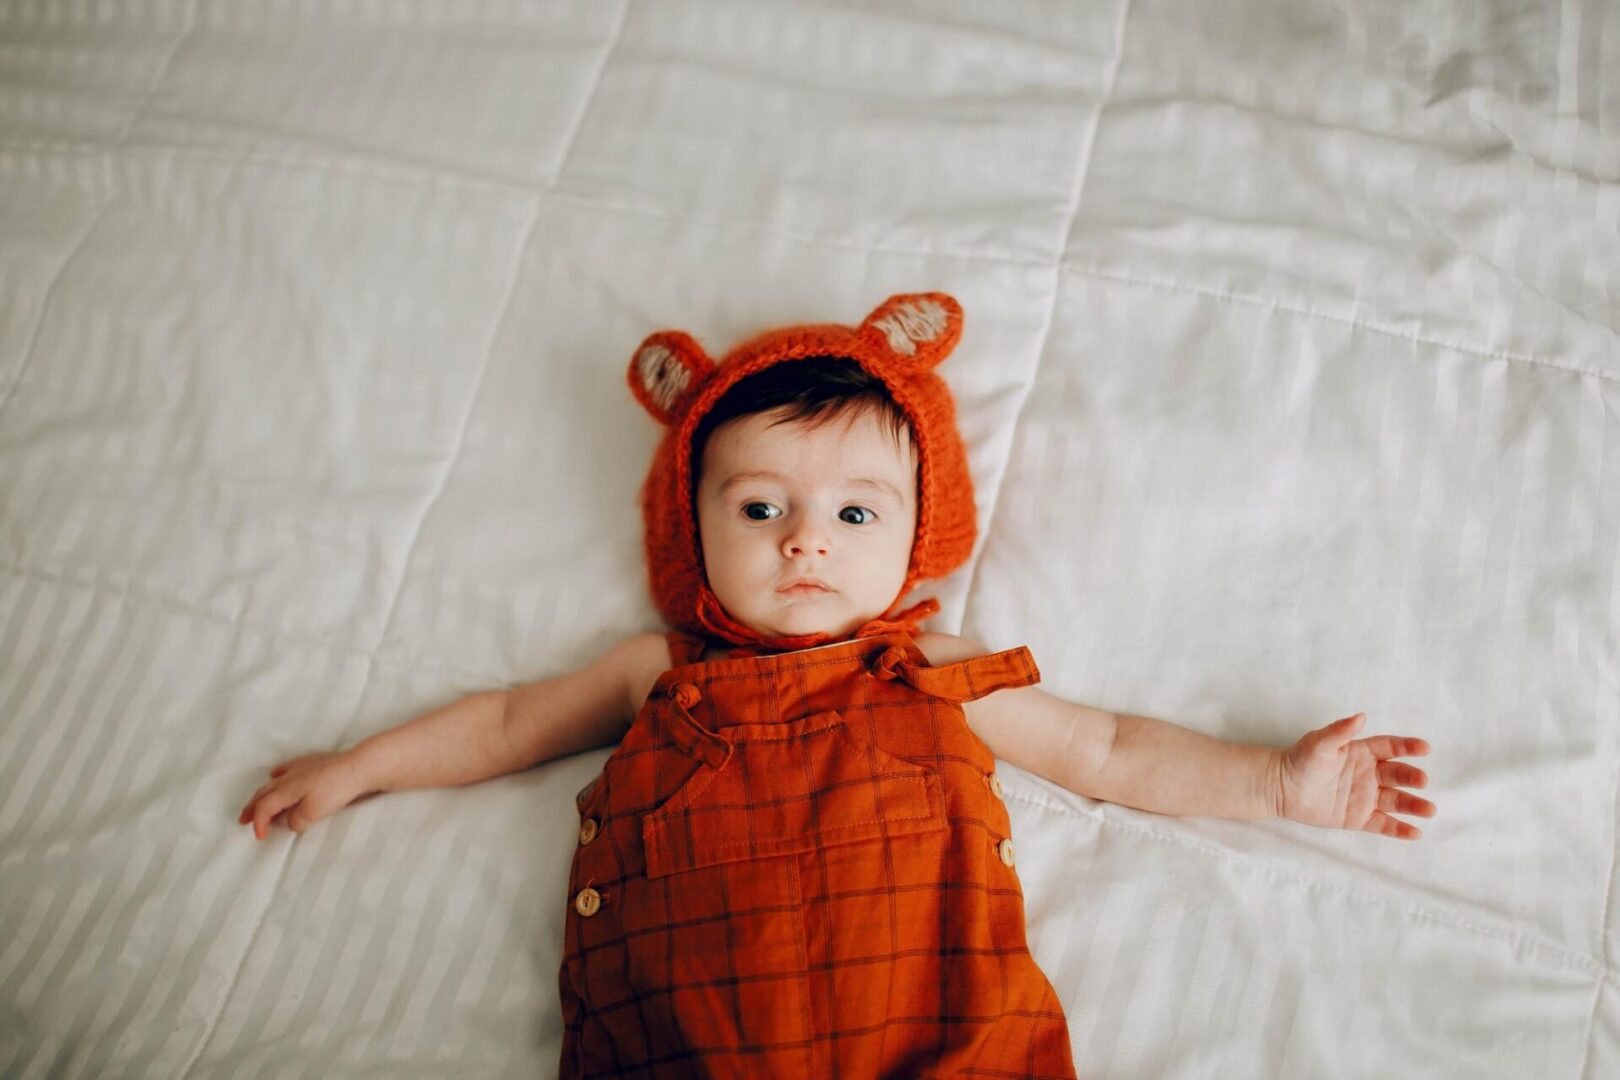 A baby in an orange outfit laying on the bed.